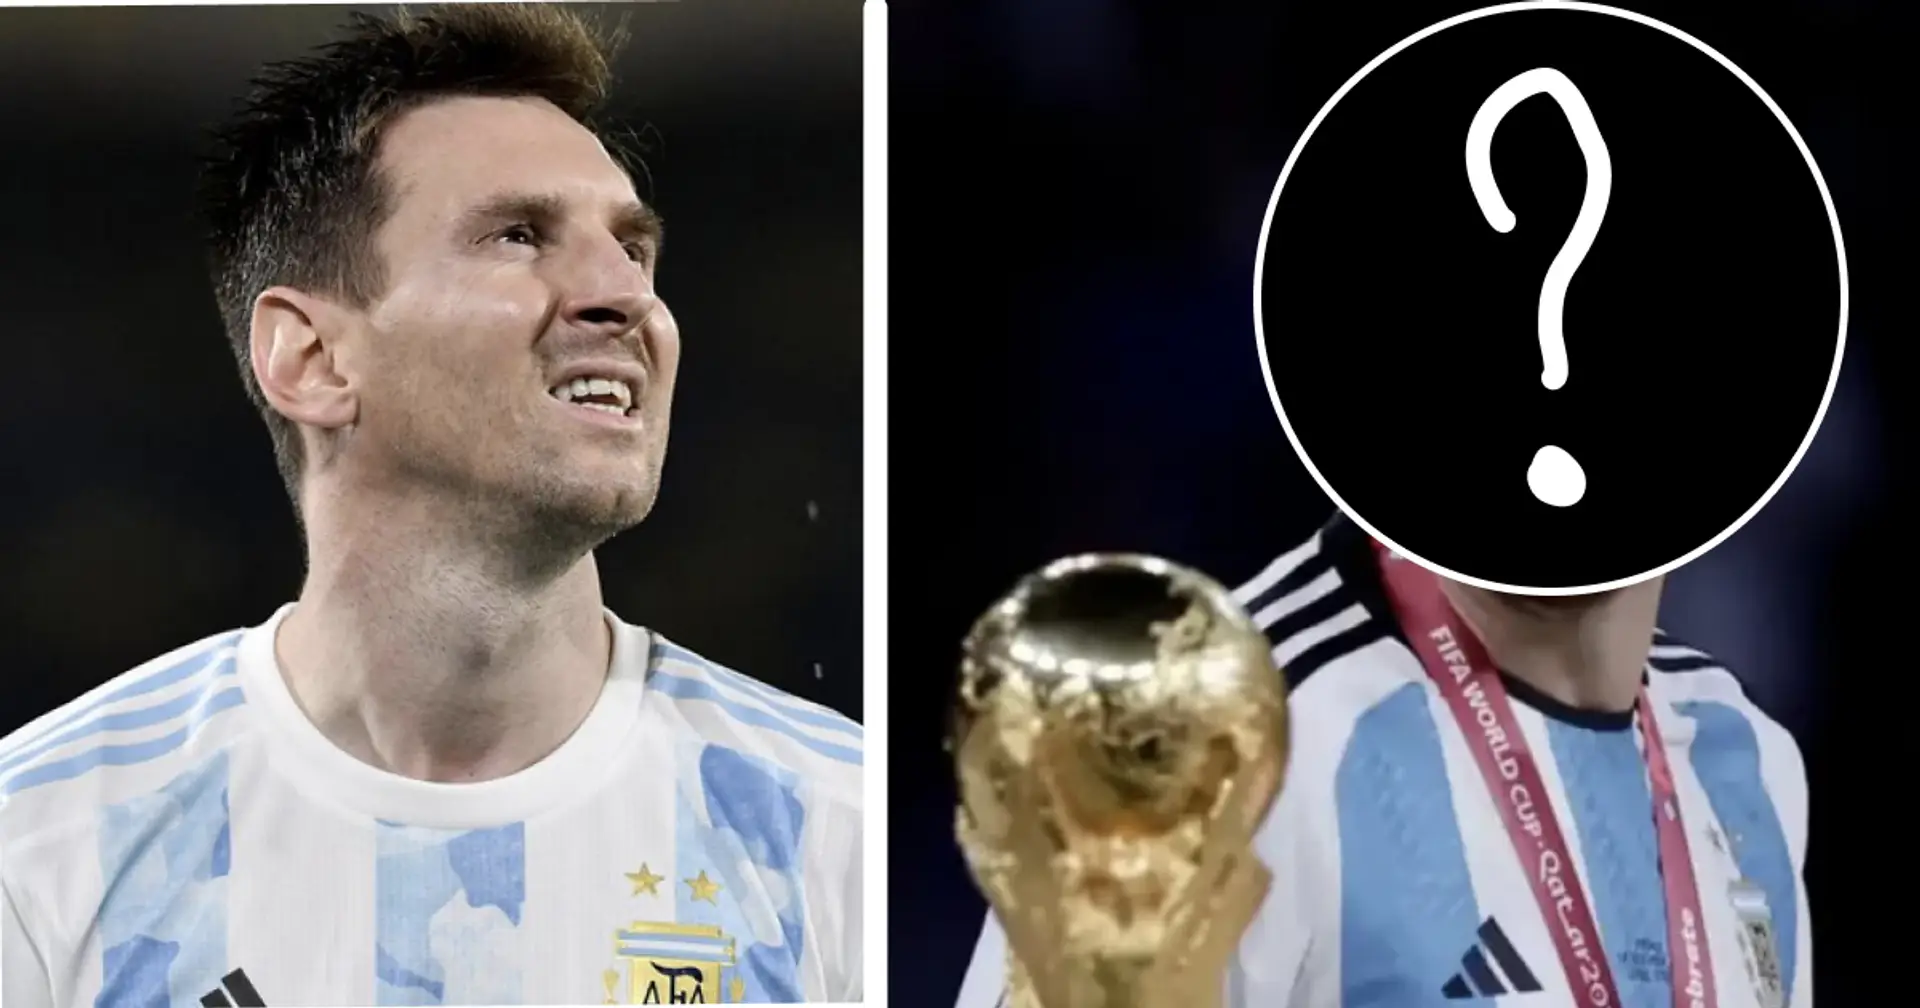 Messi's Argentina teammate banned for doping, could be stripped off World Cup medal